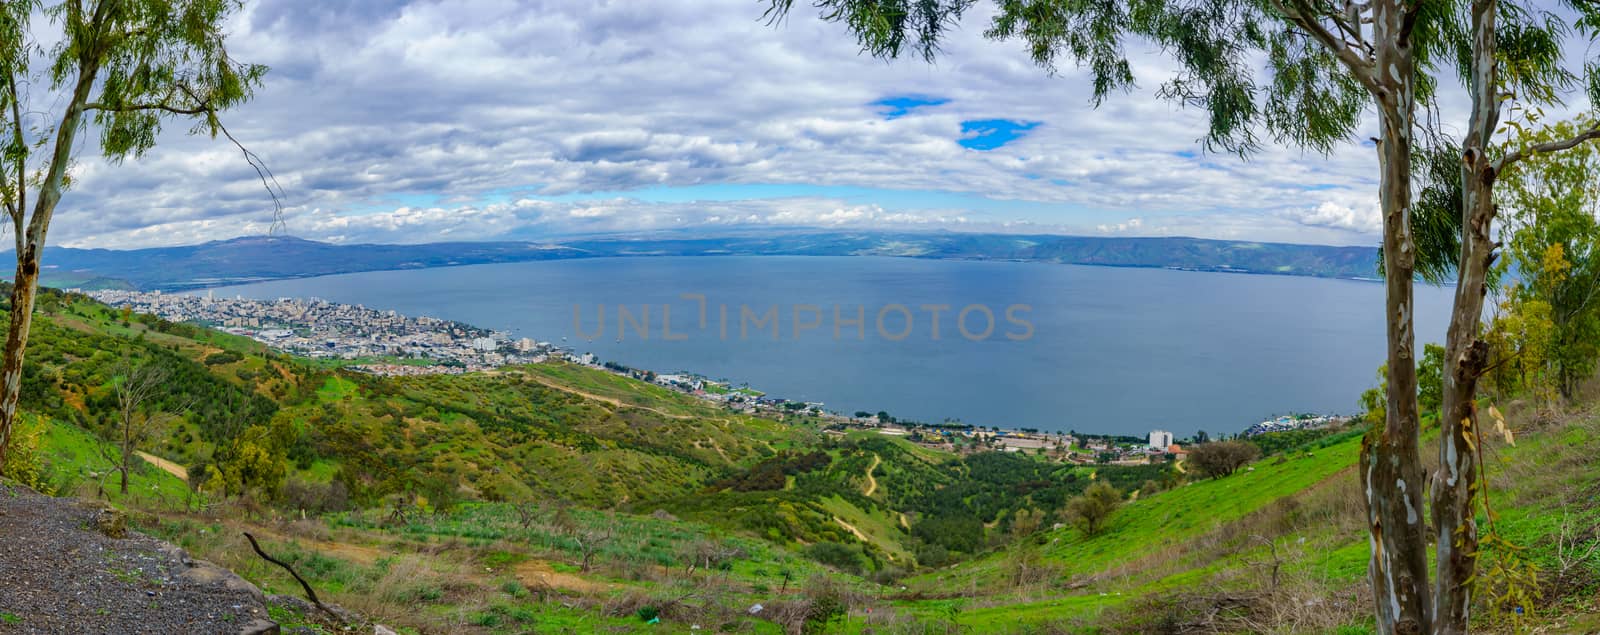 Panoramic view of the Sea of Galilee by RnDmS